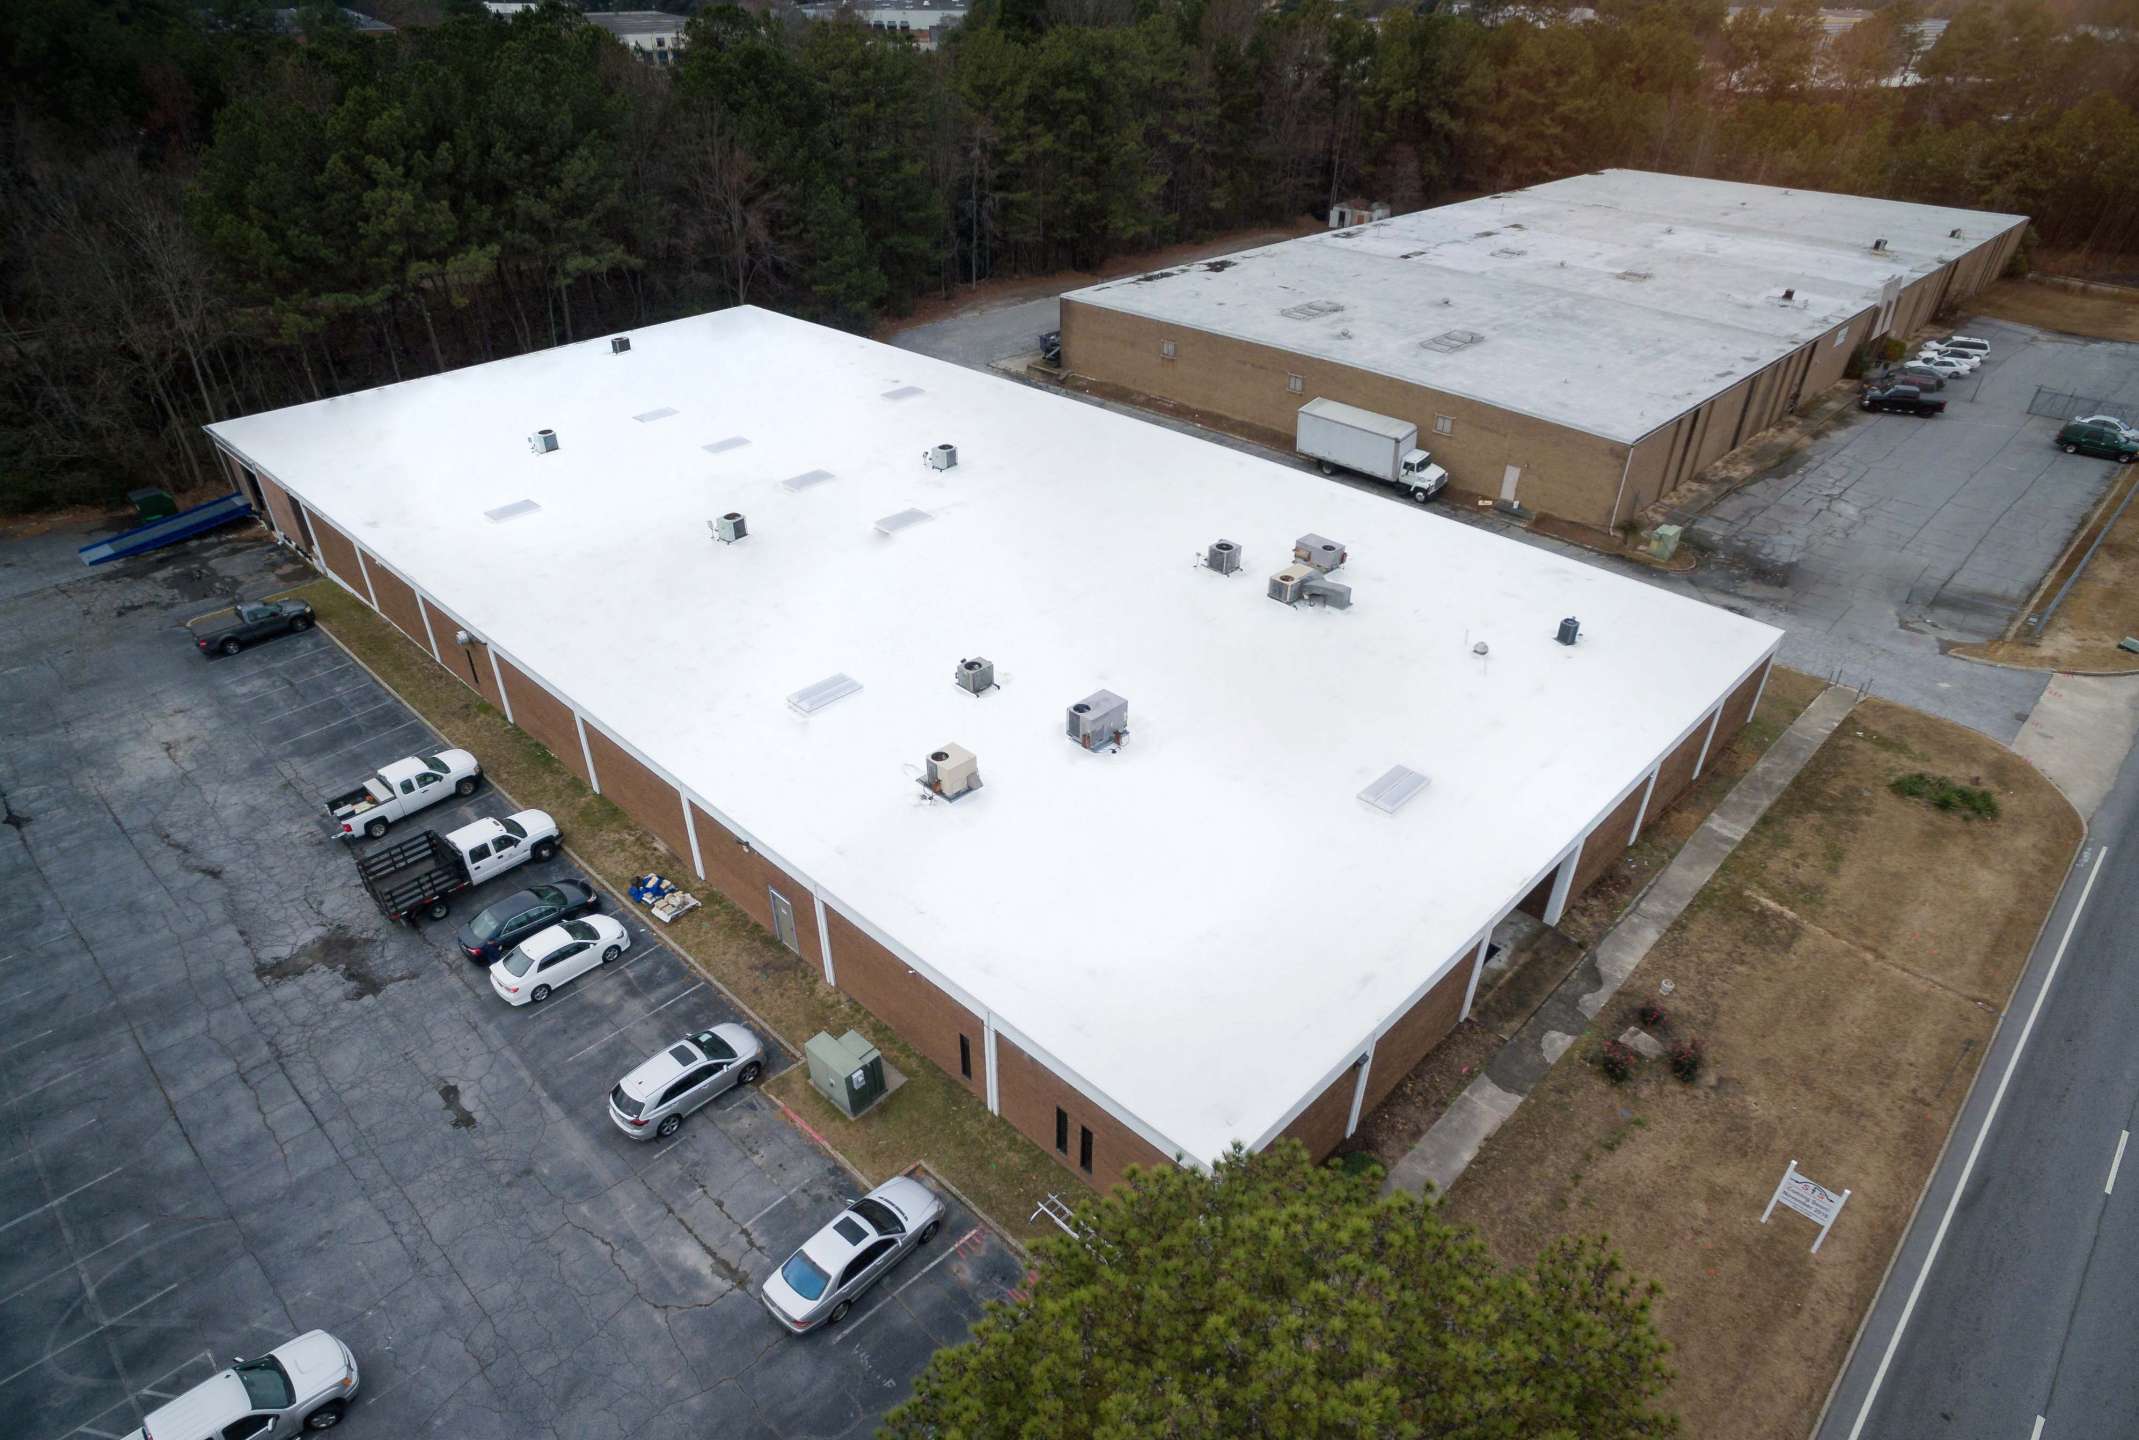 Overview image of a commercial reroof project for Southern Fluid Systems in Atlanta